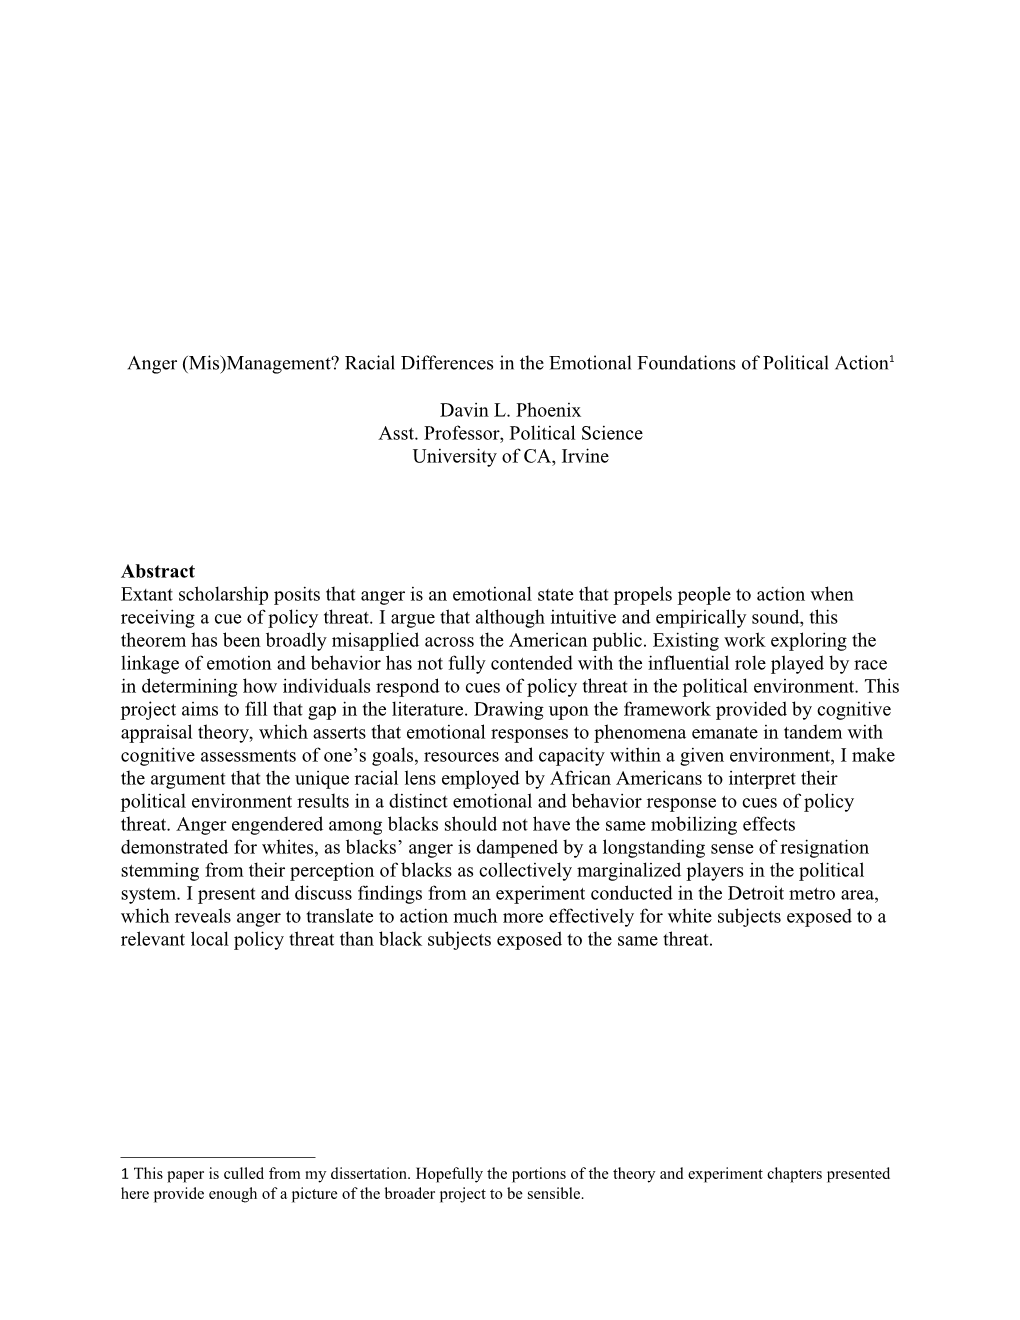 Anger (Mis)Management? Racial Differences in the Emotional Foundations of Political Action 1